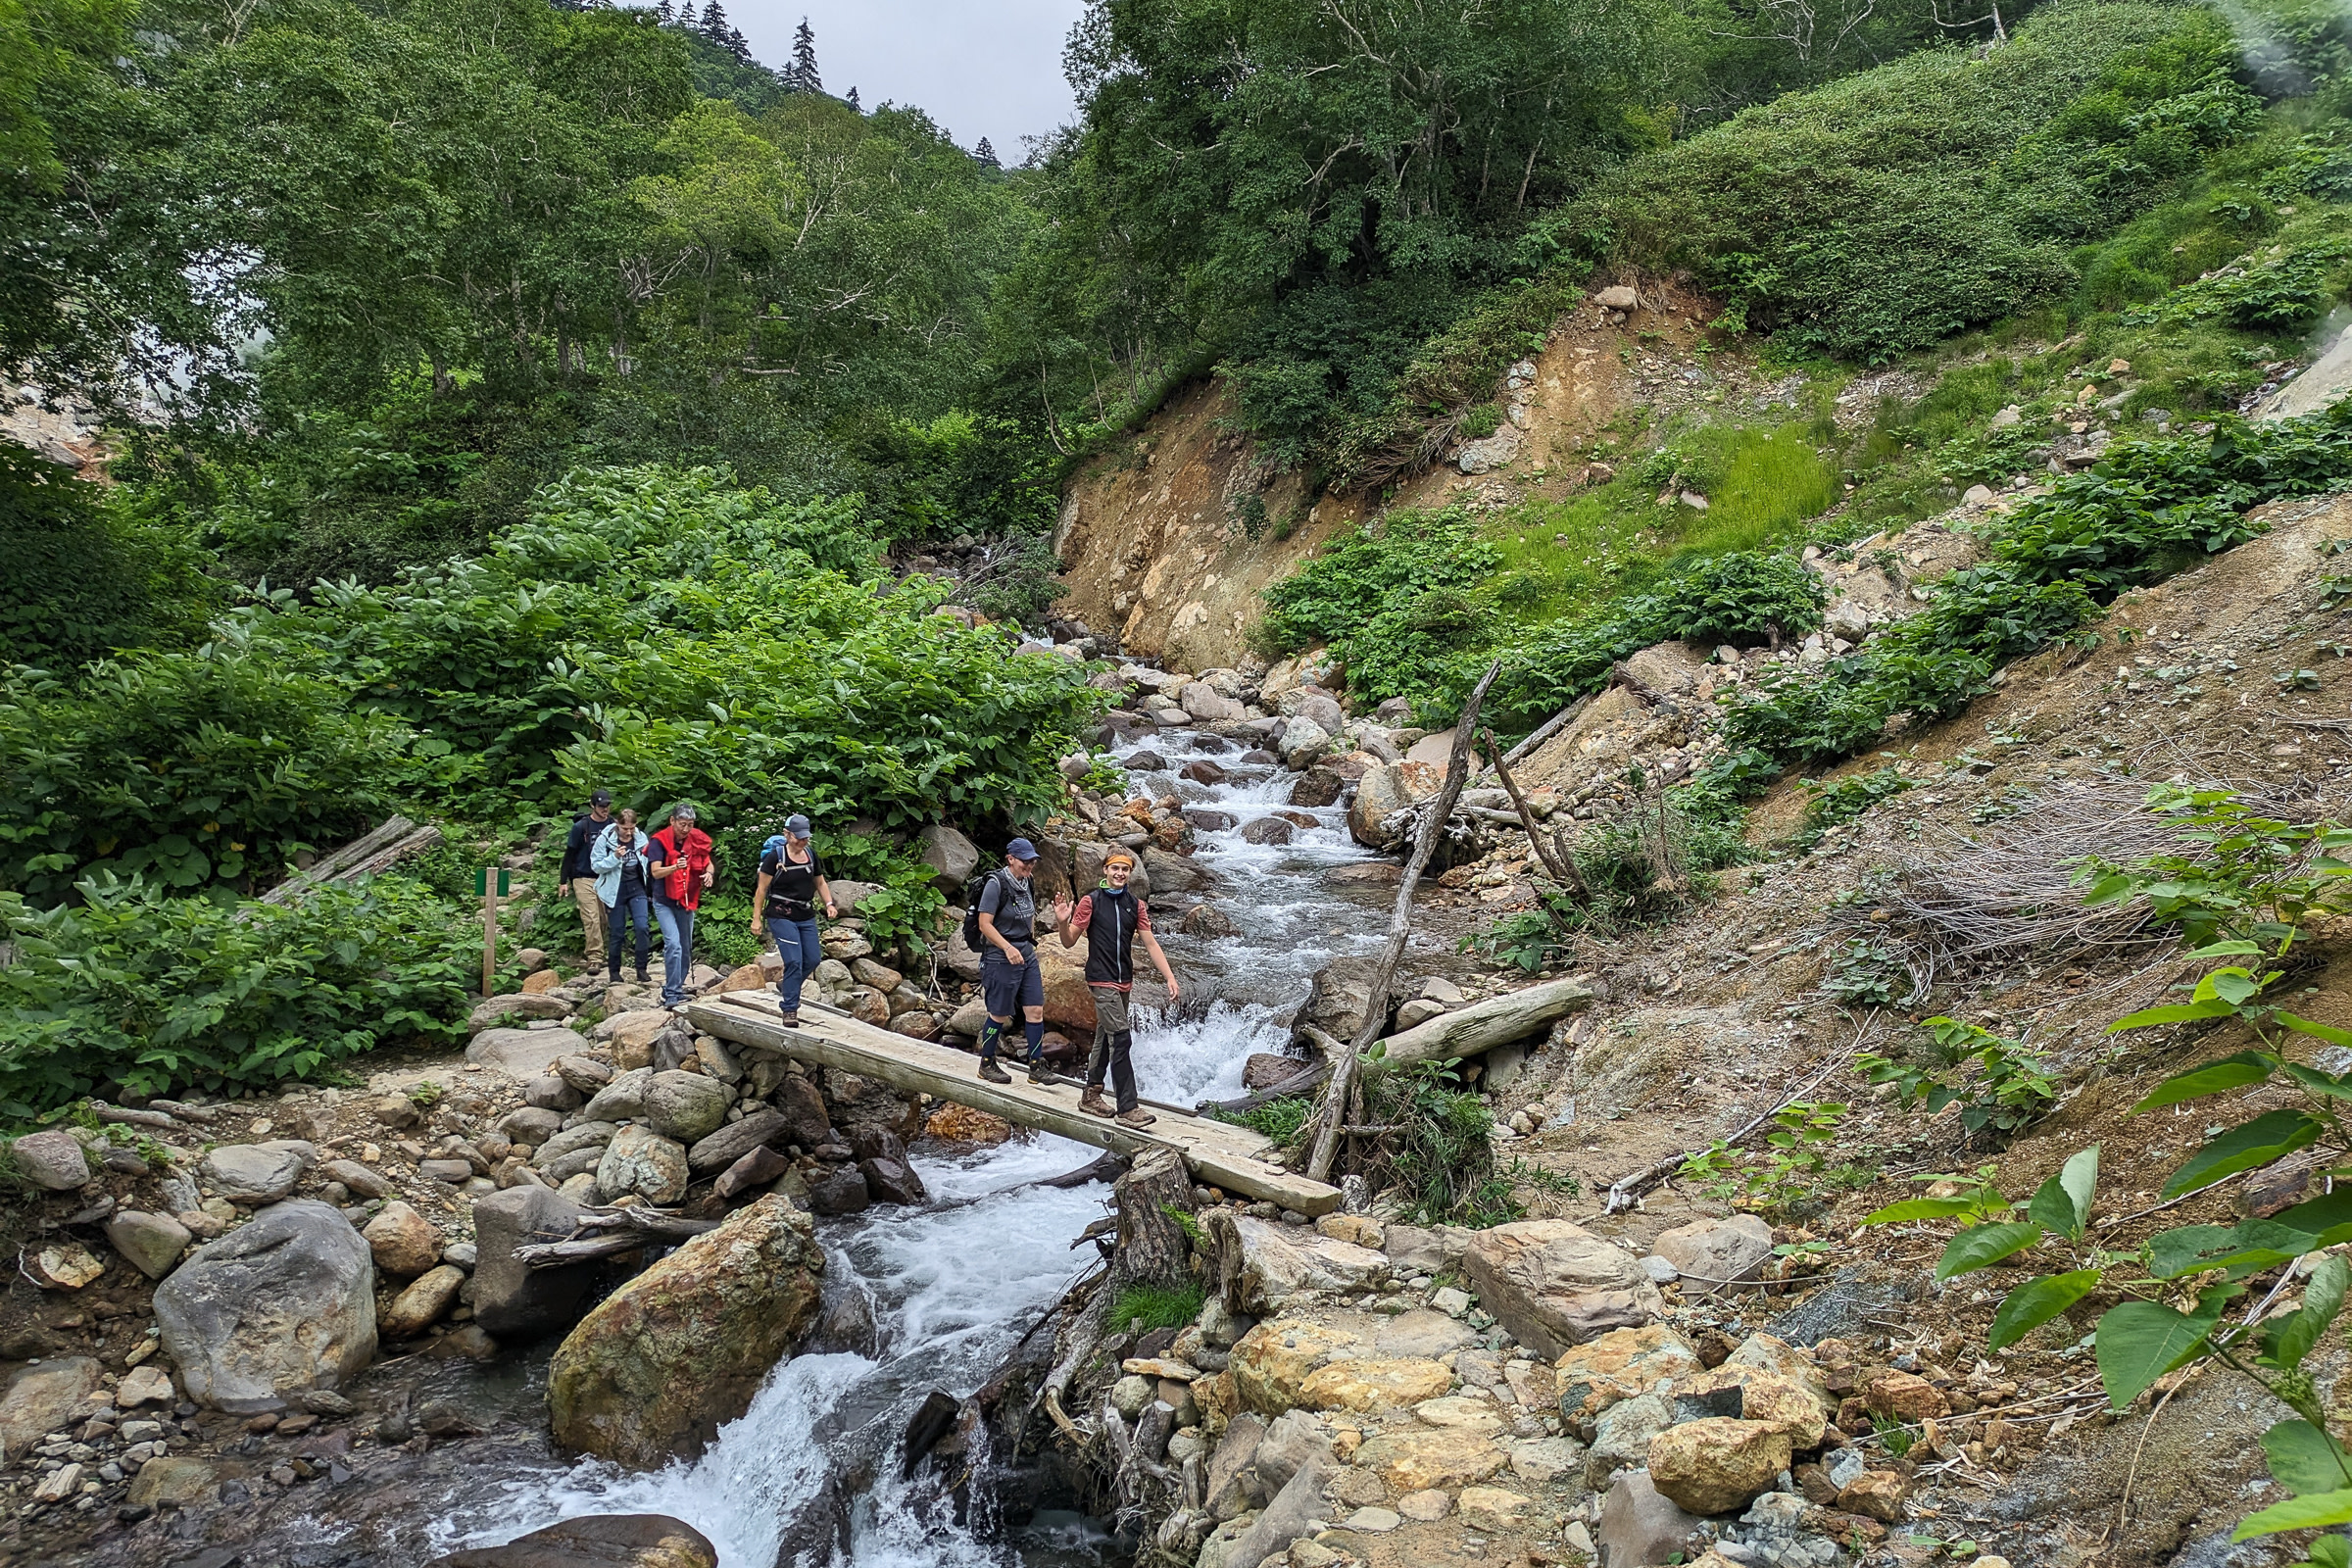 A group of six hikers wave to the camera as they cross a log bridge over a small stream.